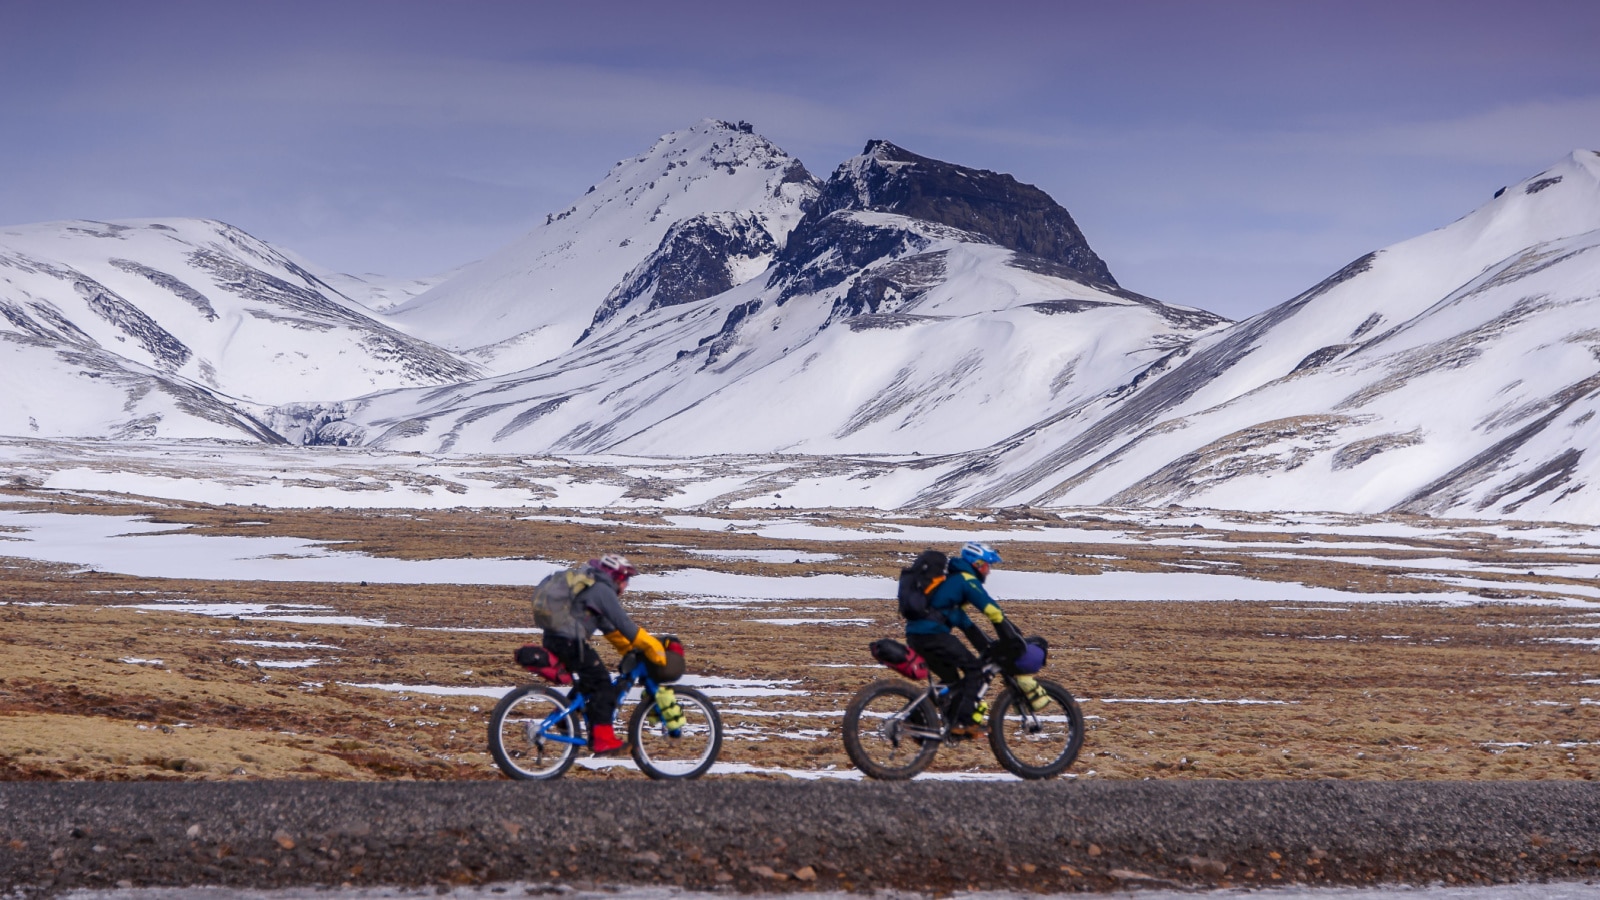 Two people cycle through a snow covered, mountainous landscape in Western Iceland